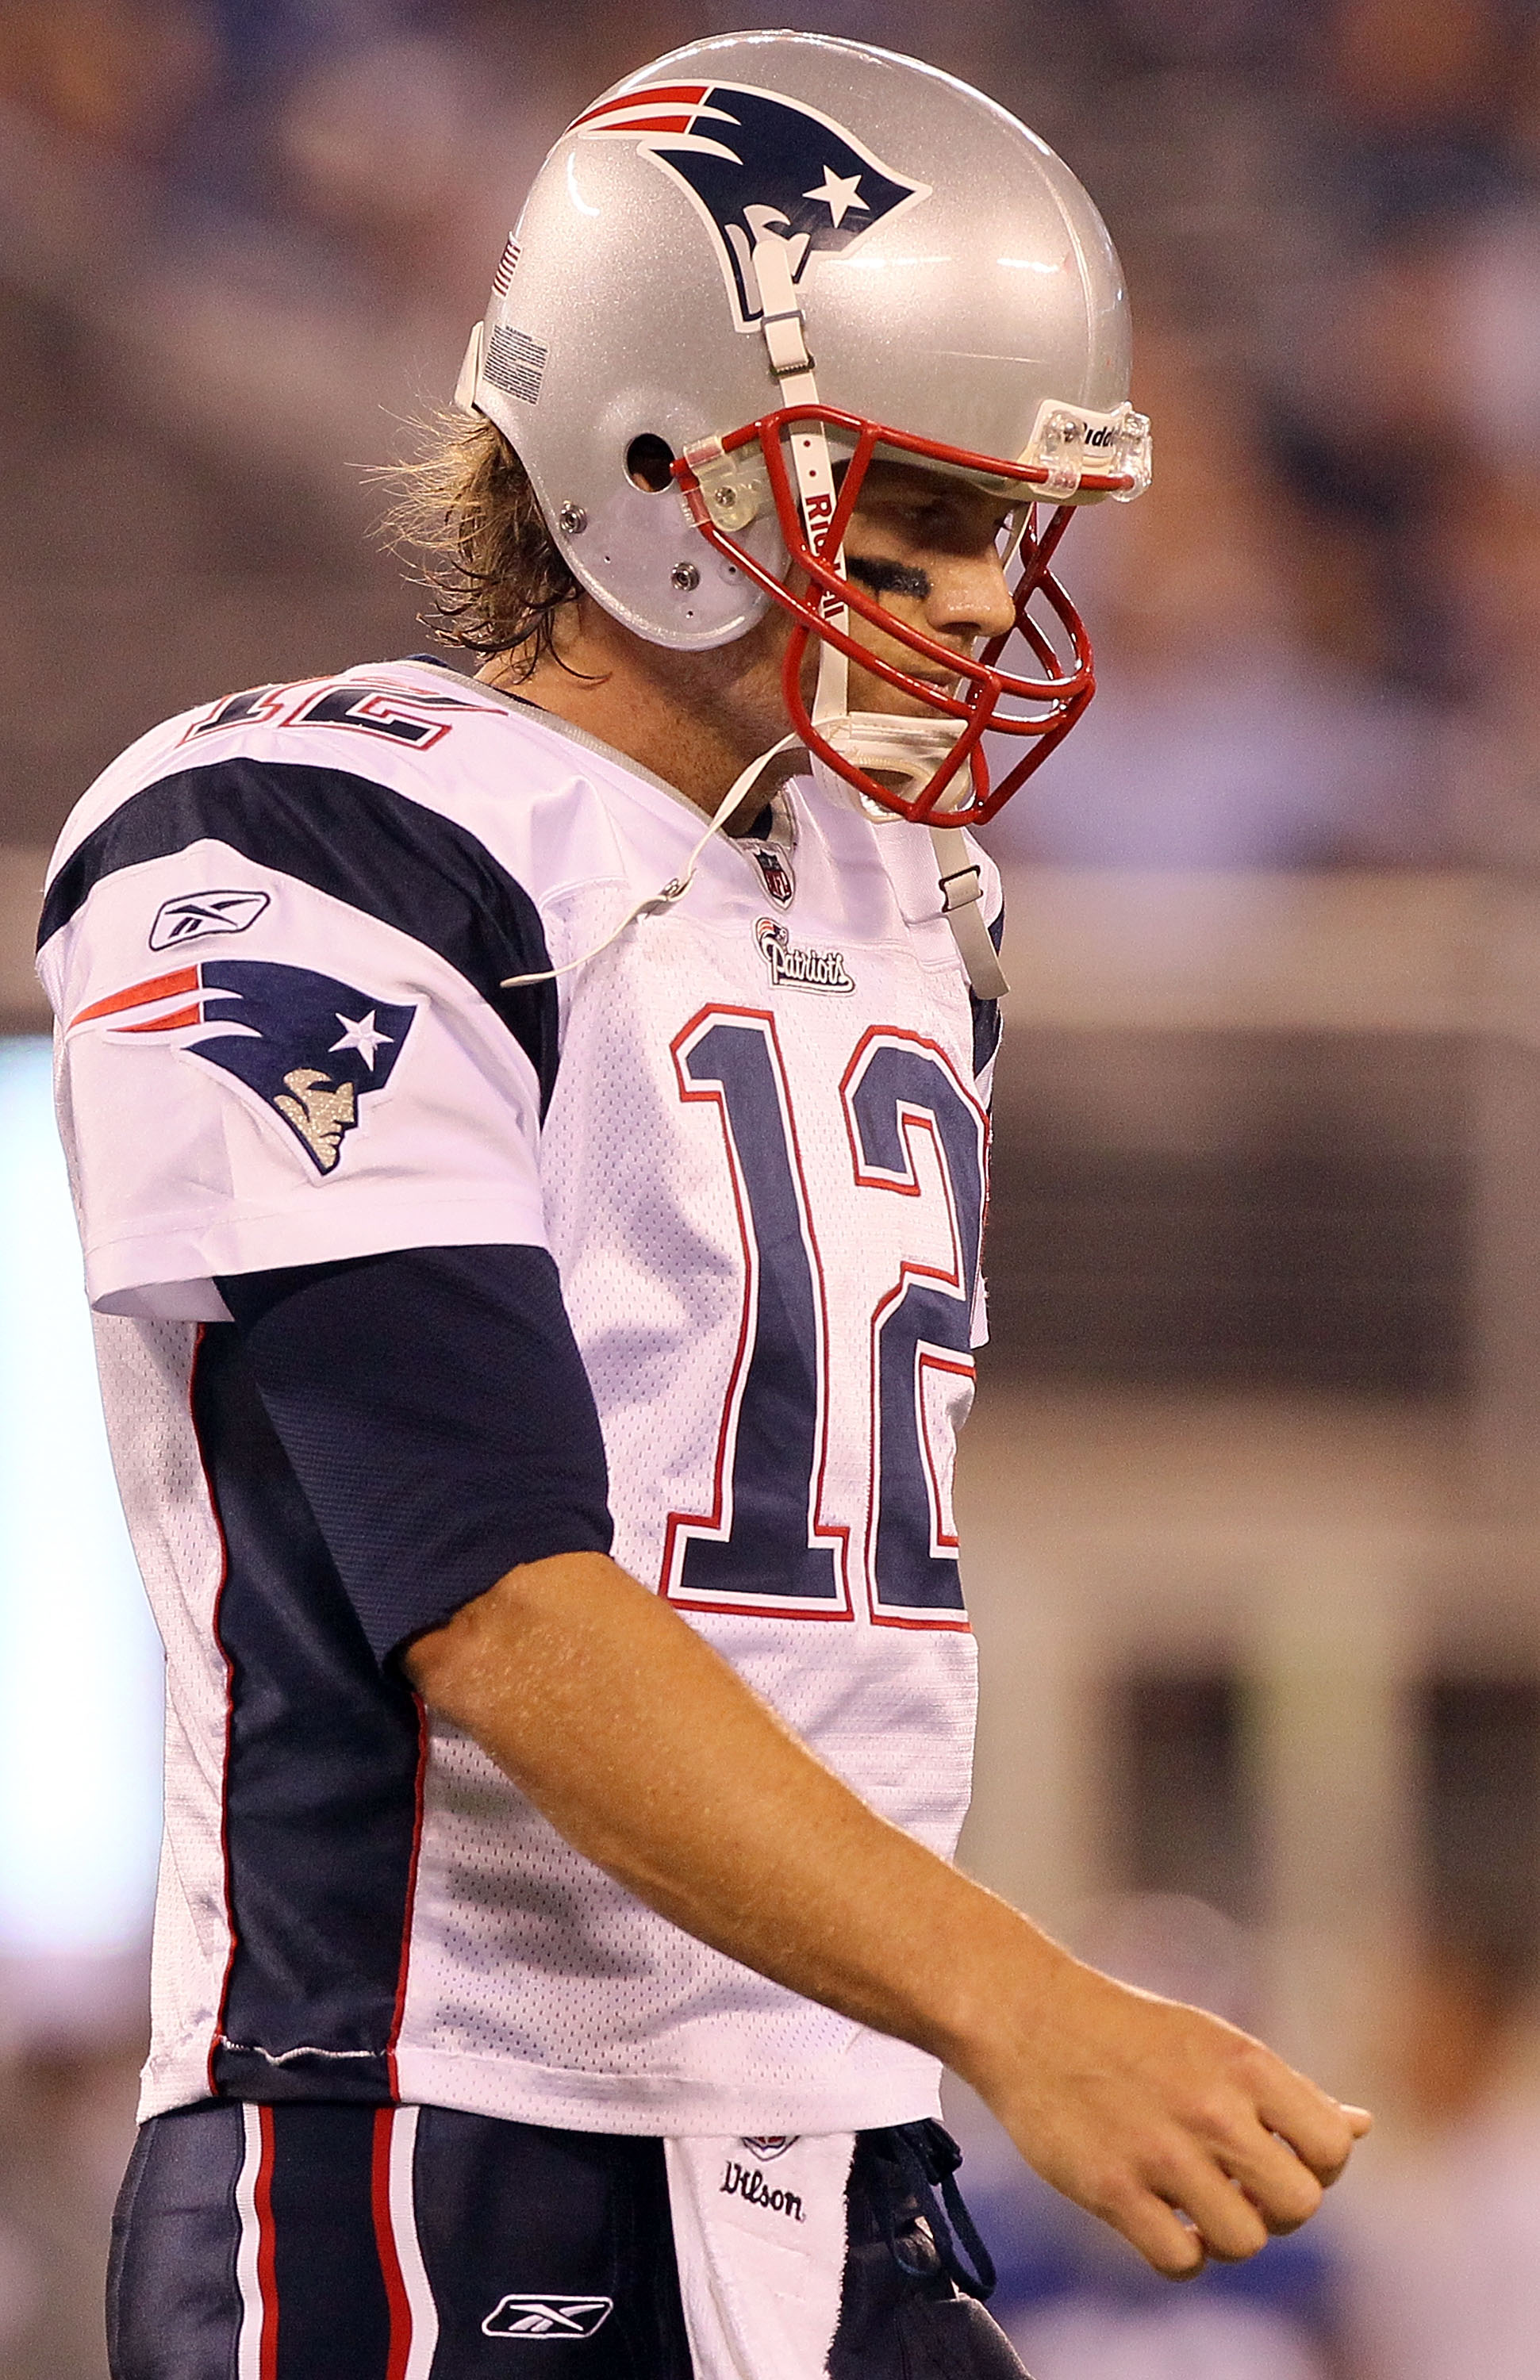 EAST RUTHERFORD, NJ - SEPTEMBER 02:  Tom Brady #12 of the New England Patriots walks to the sideline after throwing an interception against the New York Giants on September 2, 2010 at the New Meadowlands Stadium in East Rutherford, New Jersey.  (Photo by 